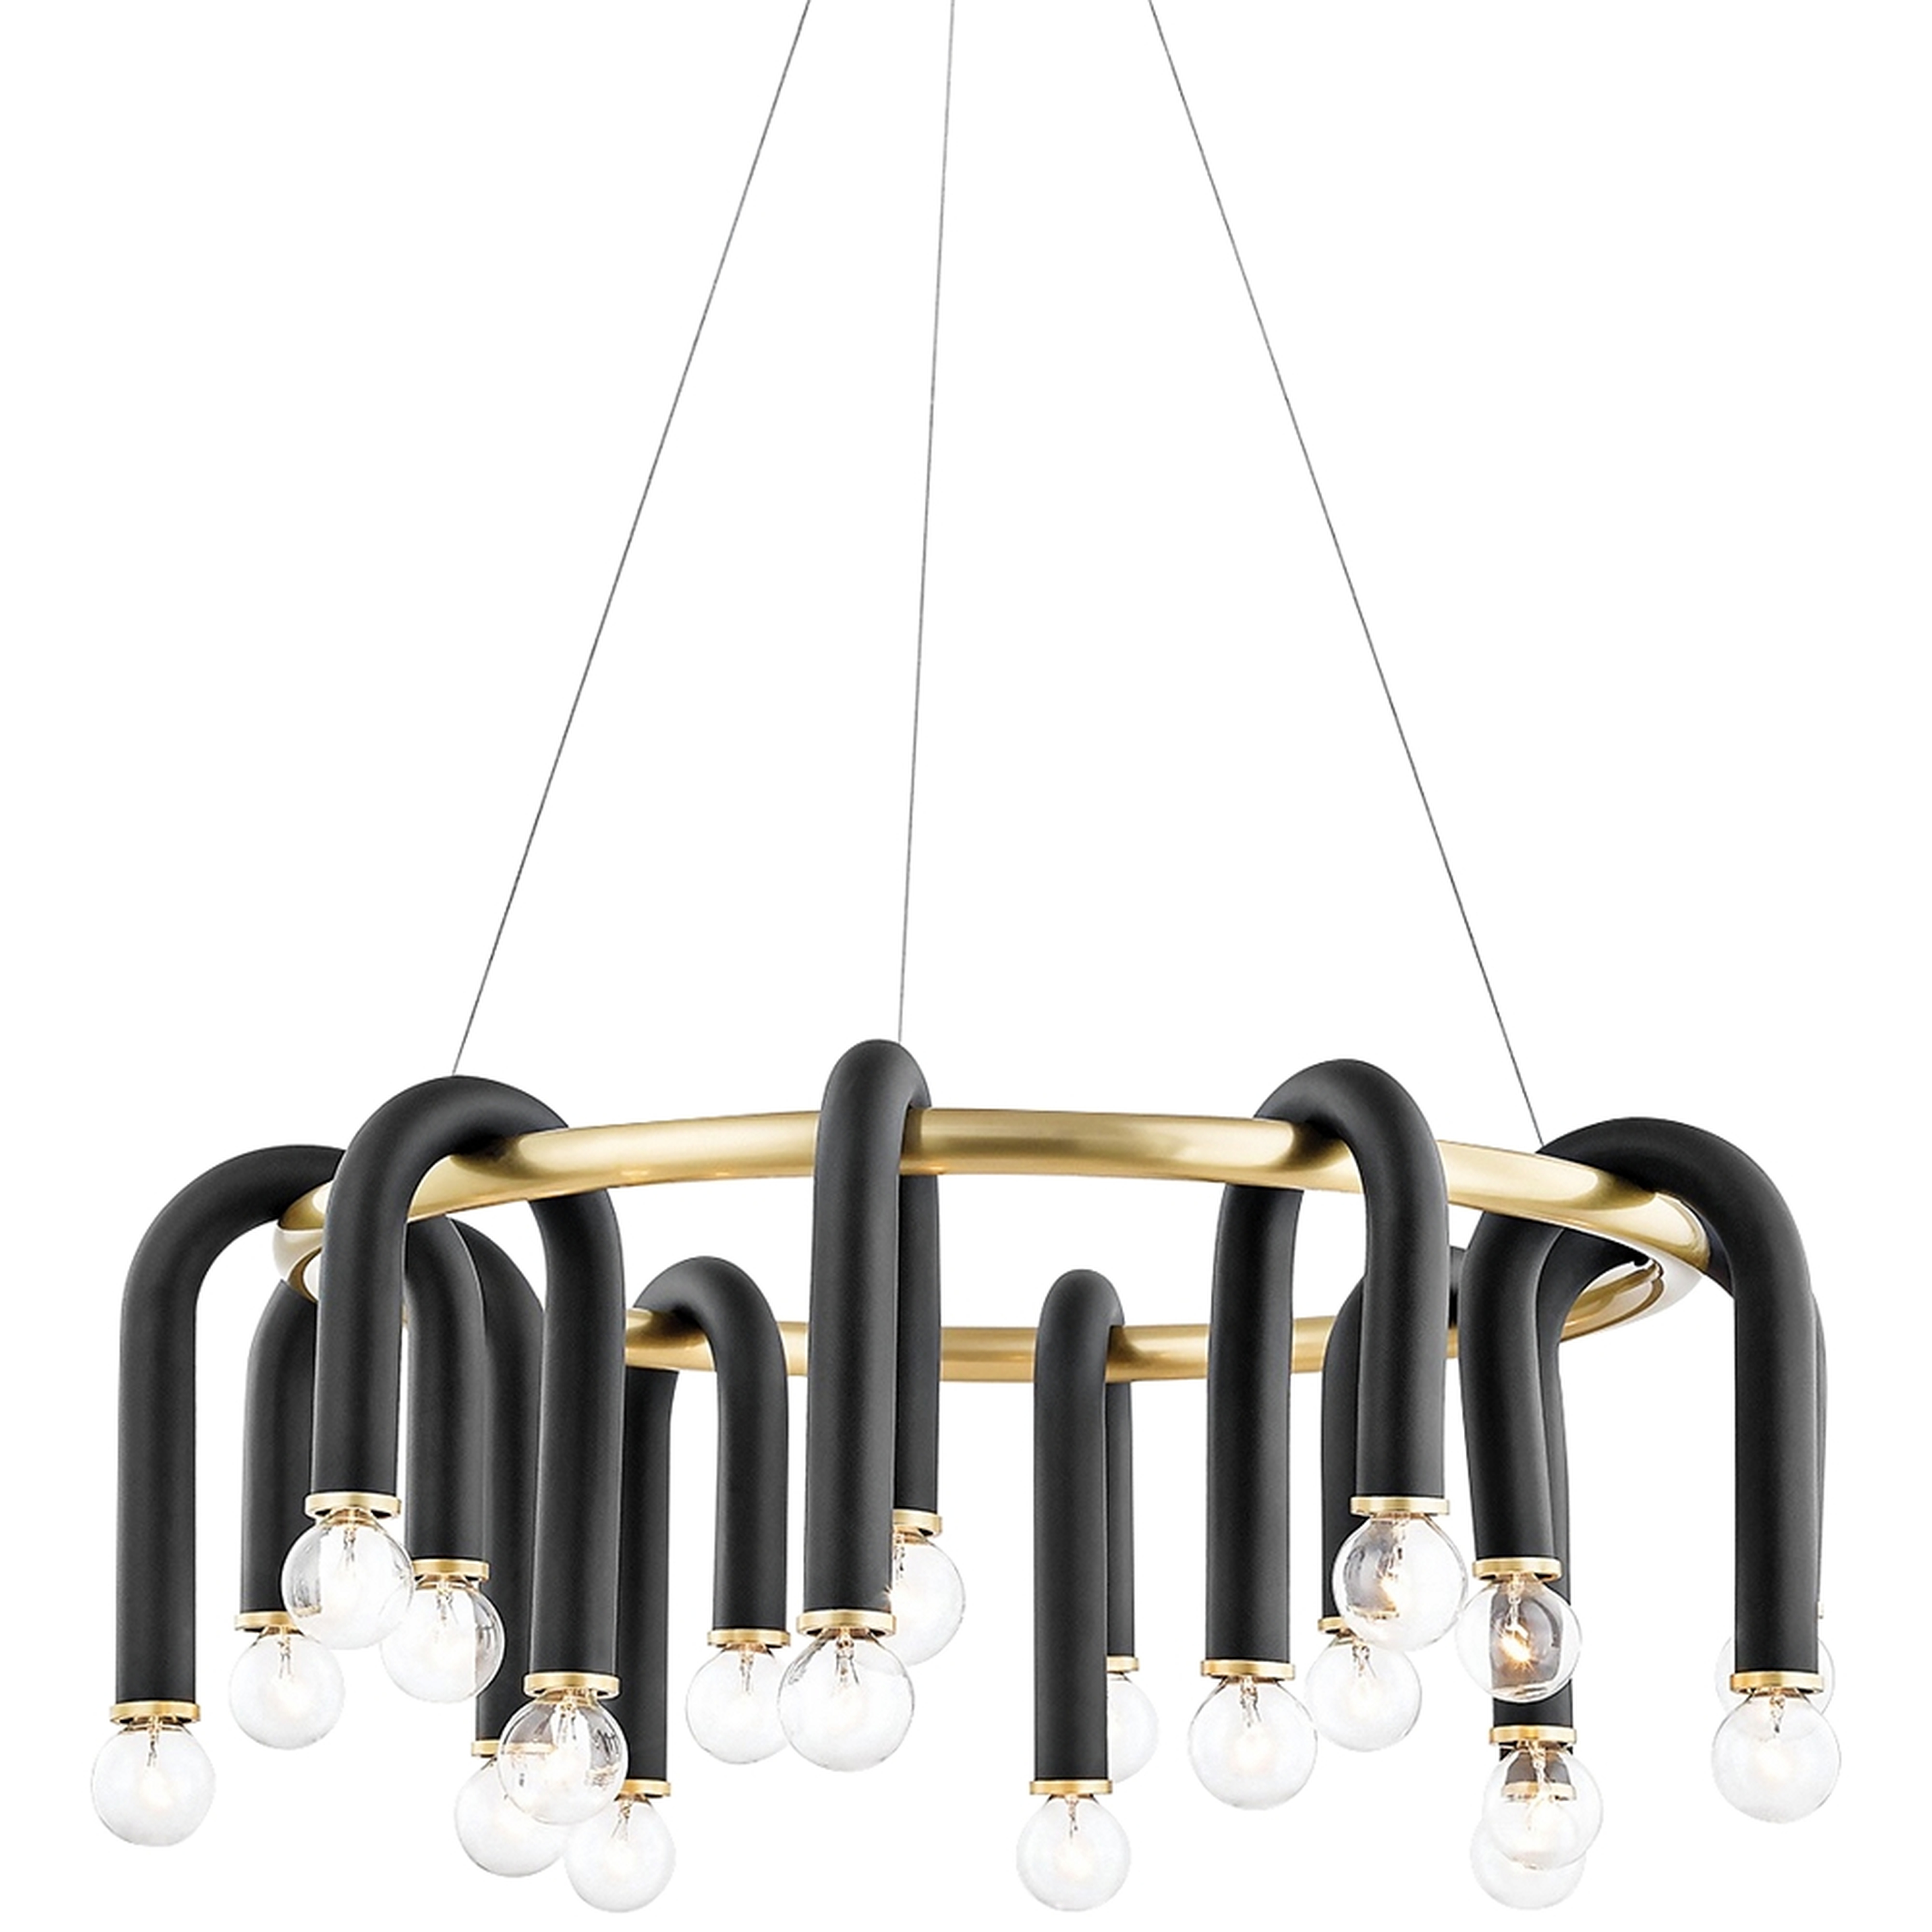 Mitzi Whit 28 3/4"W 20-Light Aged Brass and Black Chandelier - Style # 88F33 - Lamps Plus